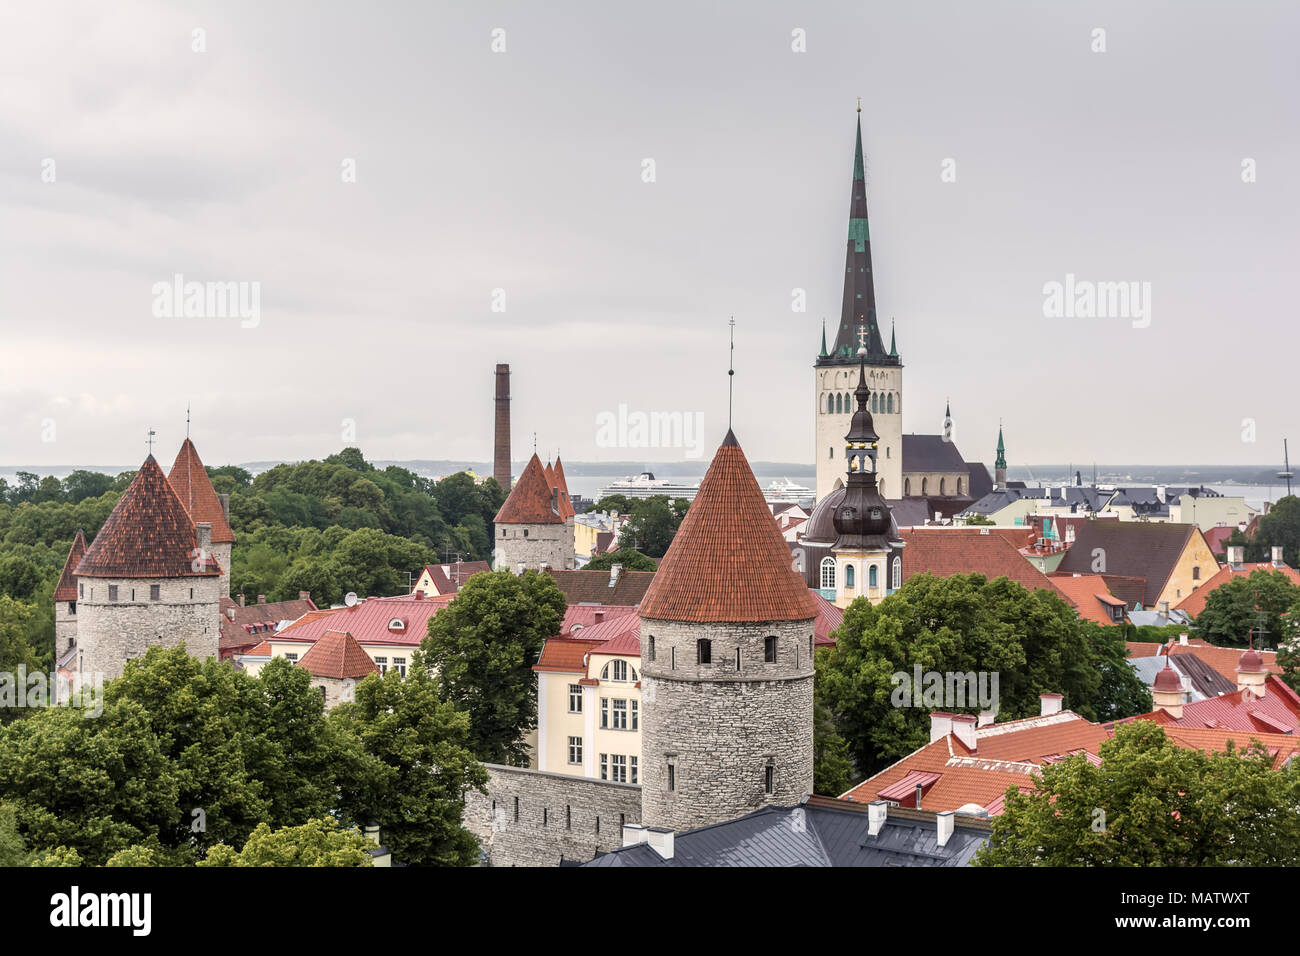 City landscape with red tiled roofs of old city and steeples on summer day in Tallinn, Estonia Stock Photo